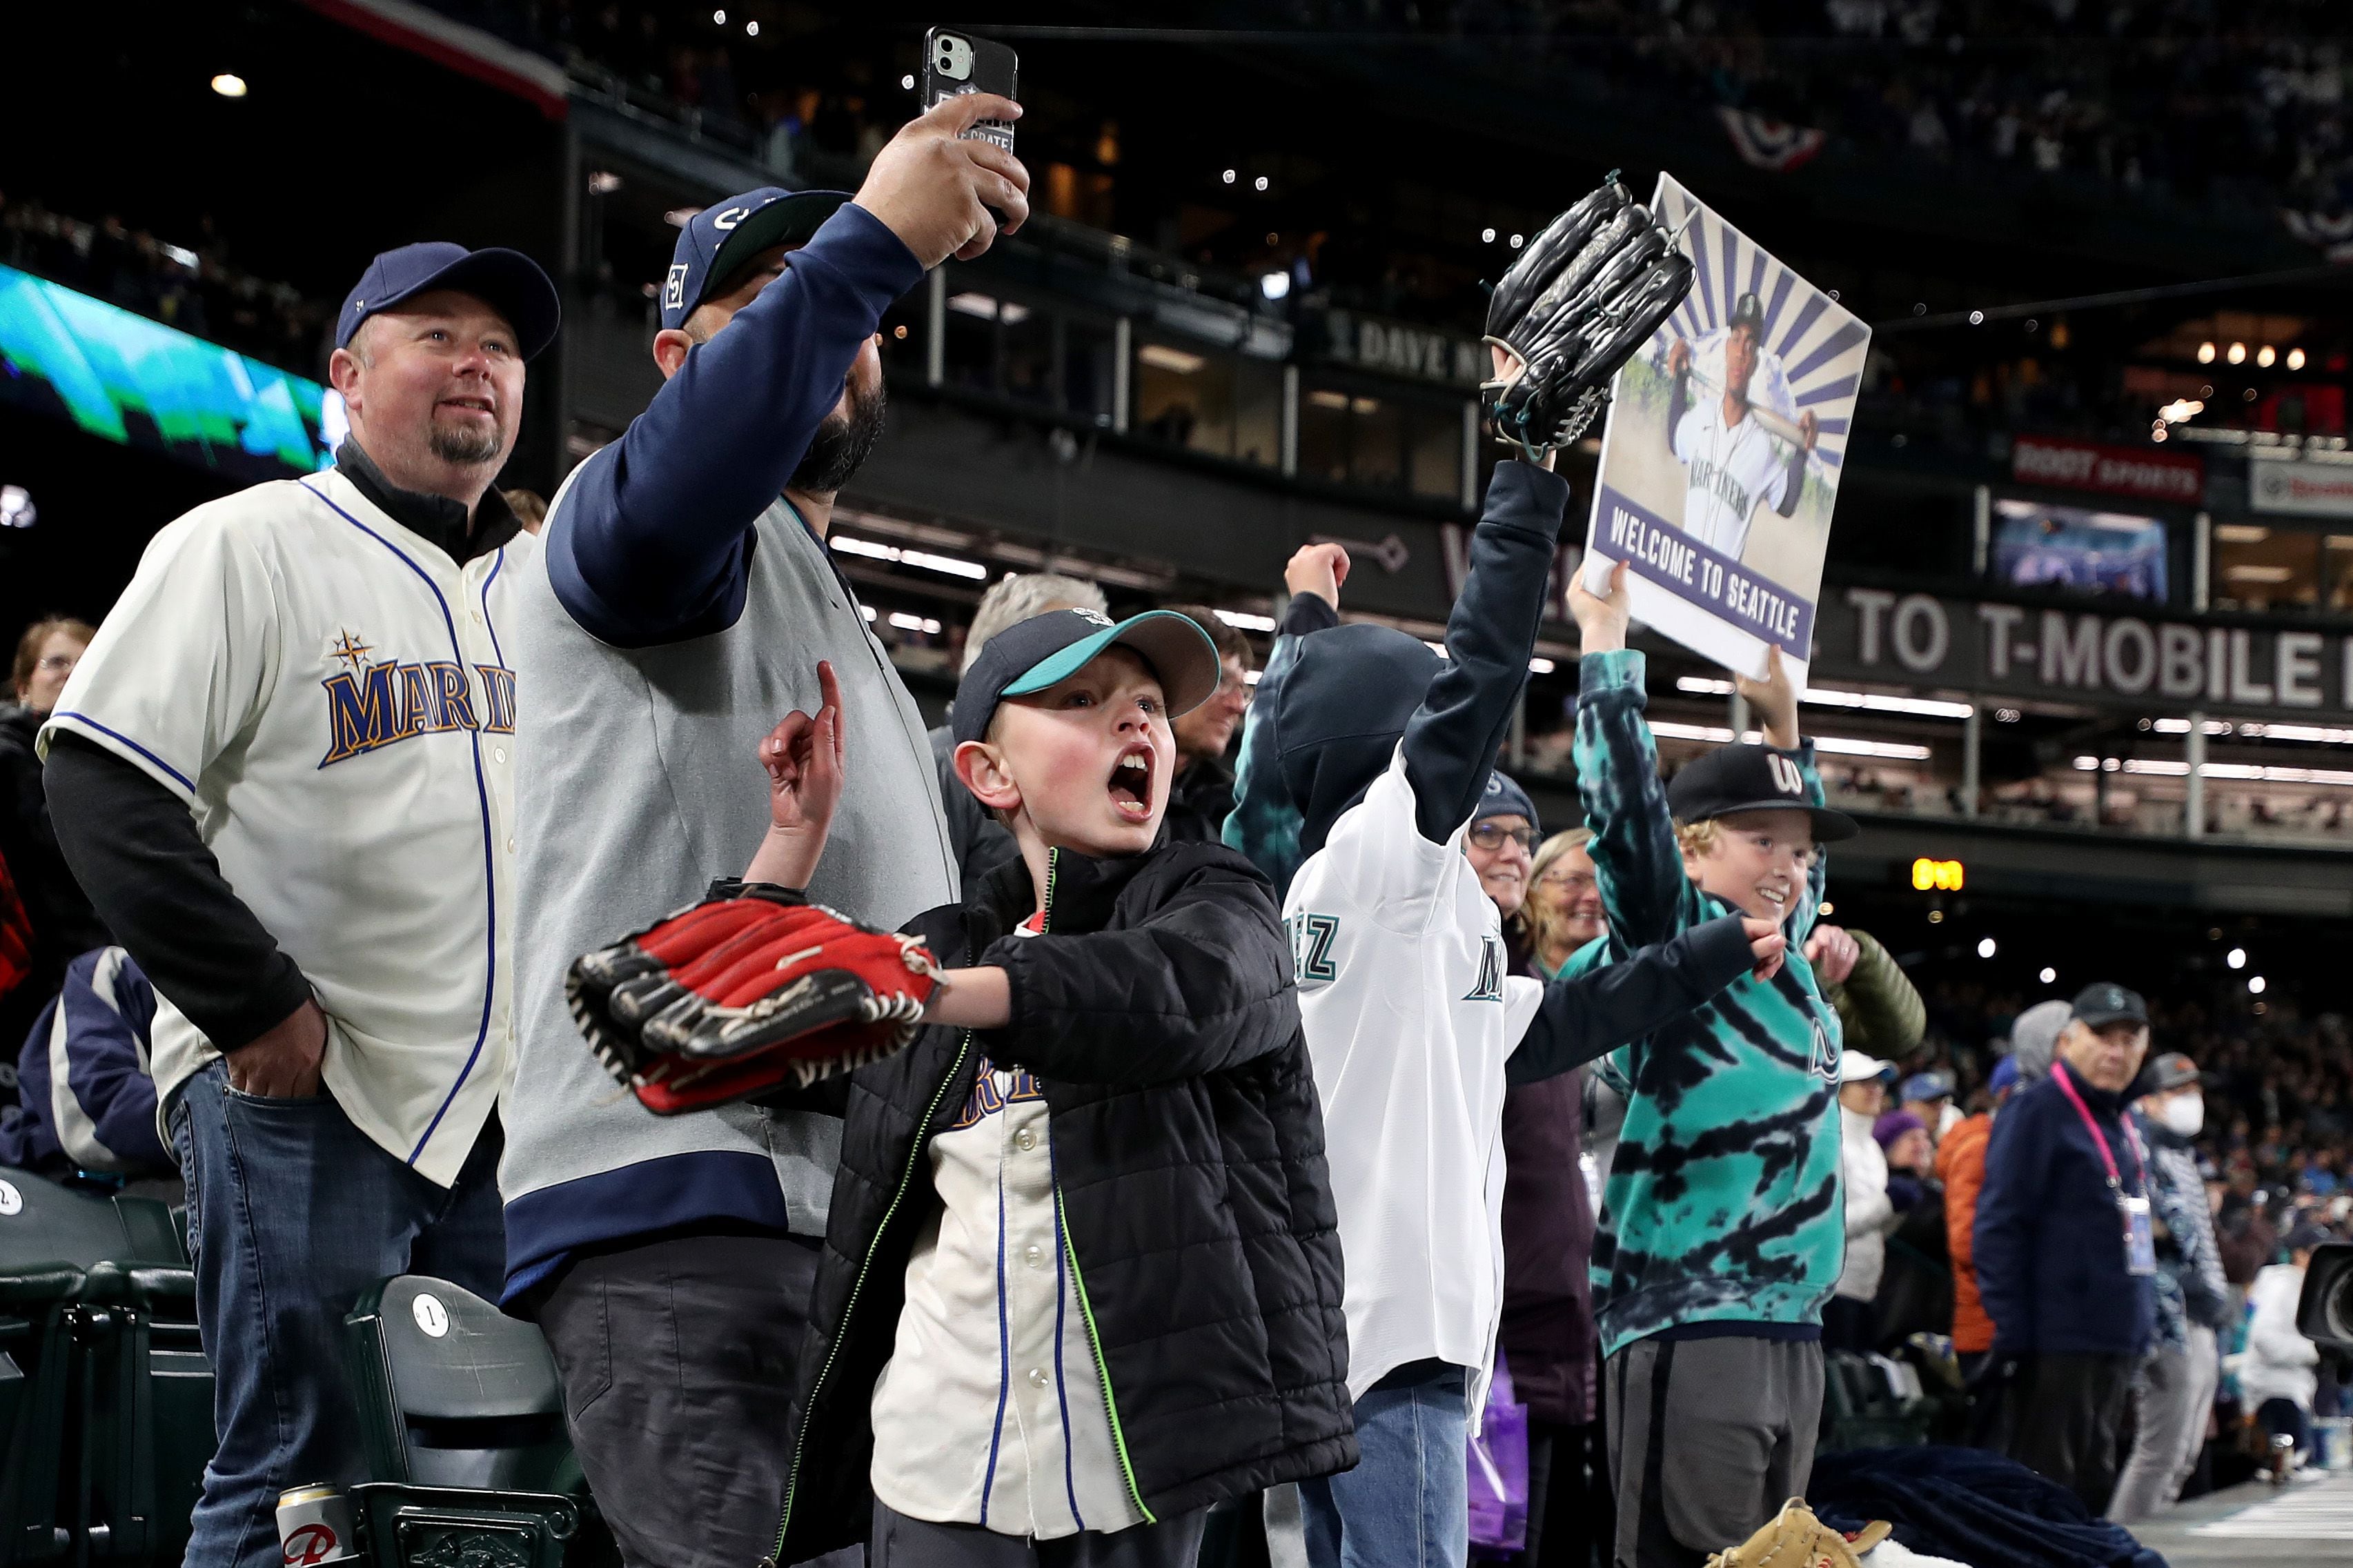 New study ranks Seattle Mariners as third-happiest MLB fan base